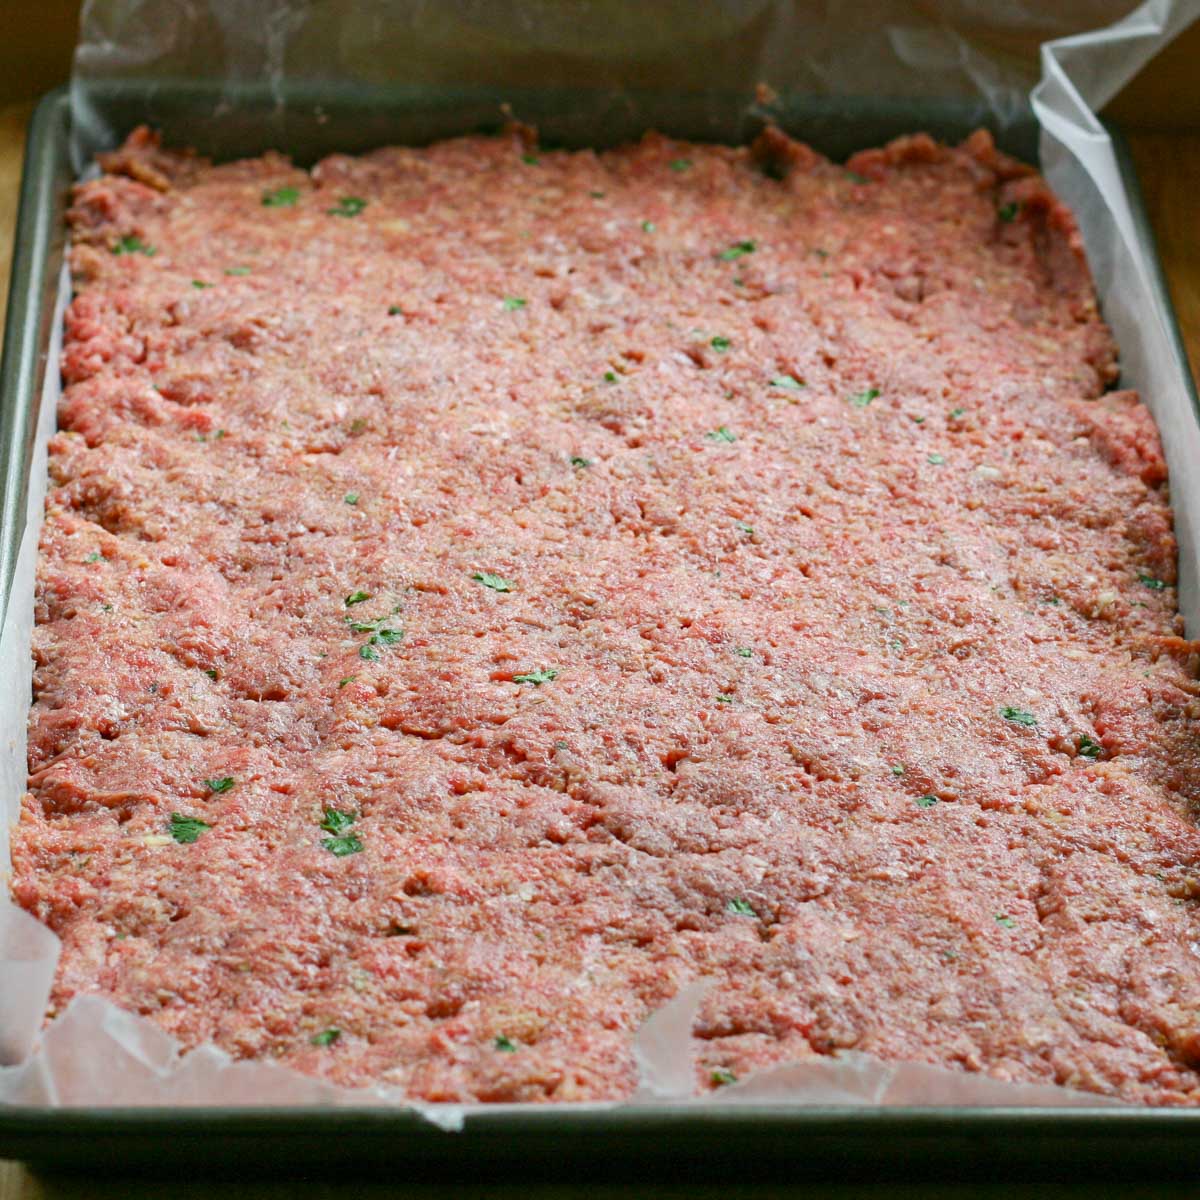 Meatloaf mixture pressed into a waxed paper lined baking sheet.